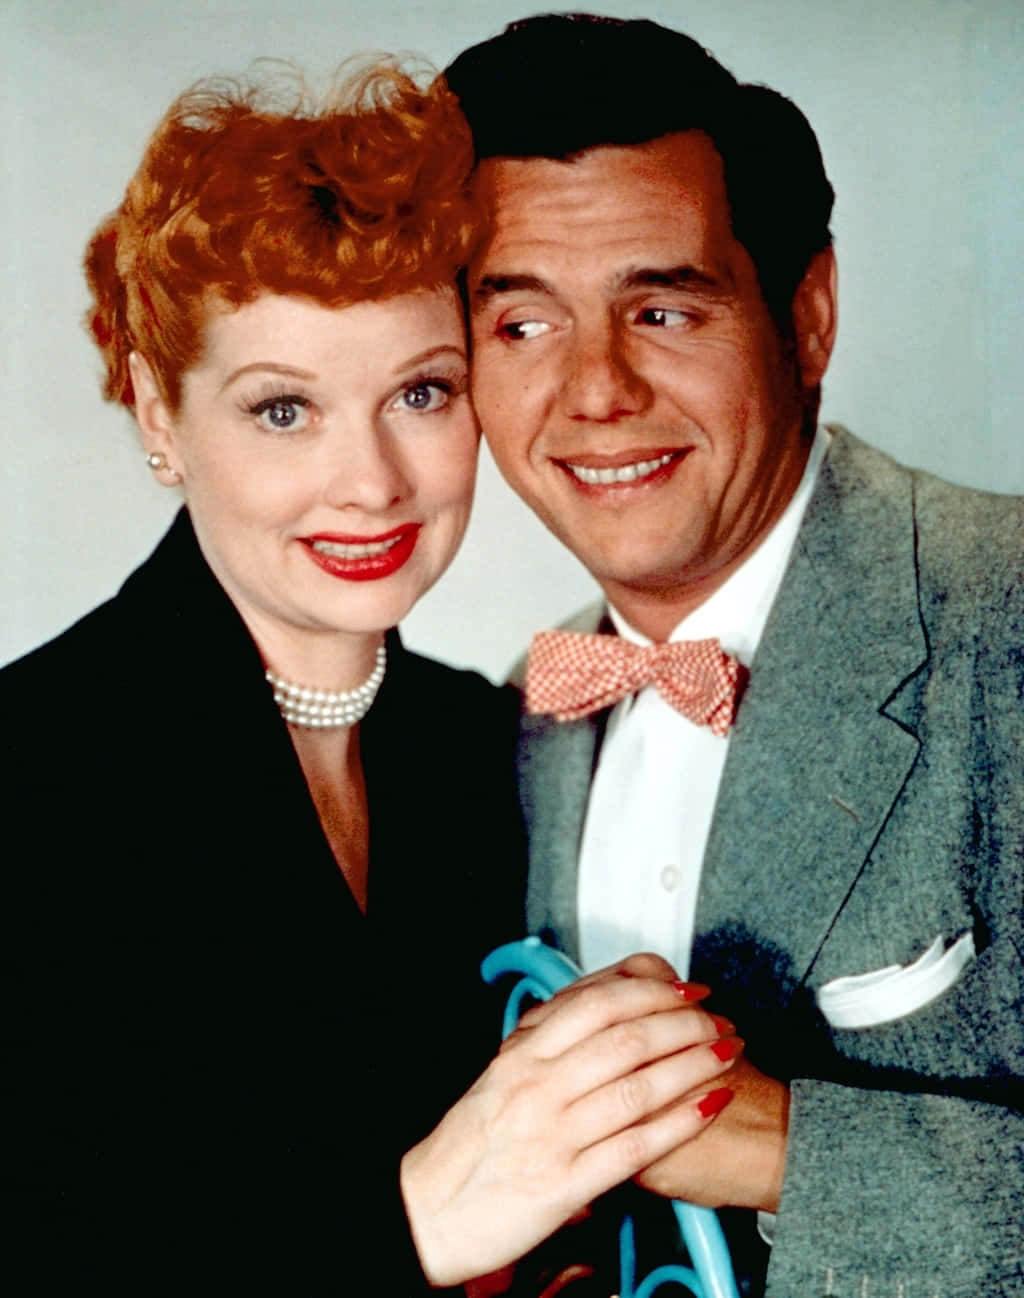 Step into the past and relive classic 1950s comedy with I Love Lucy Wallpaper